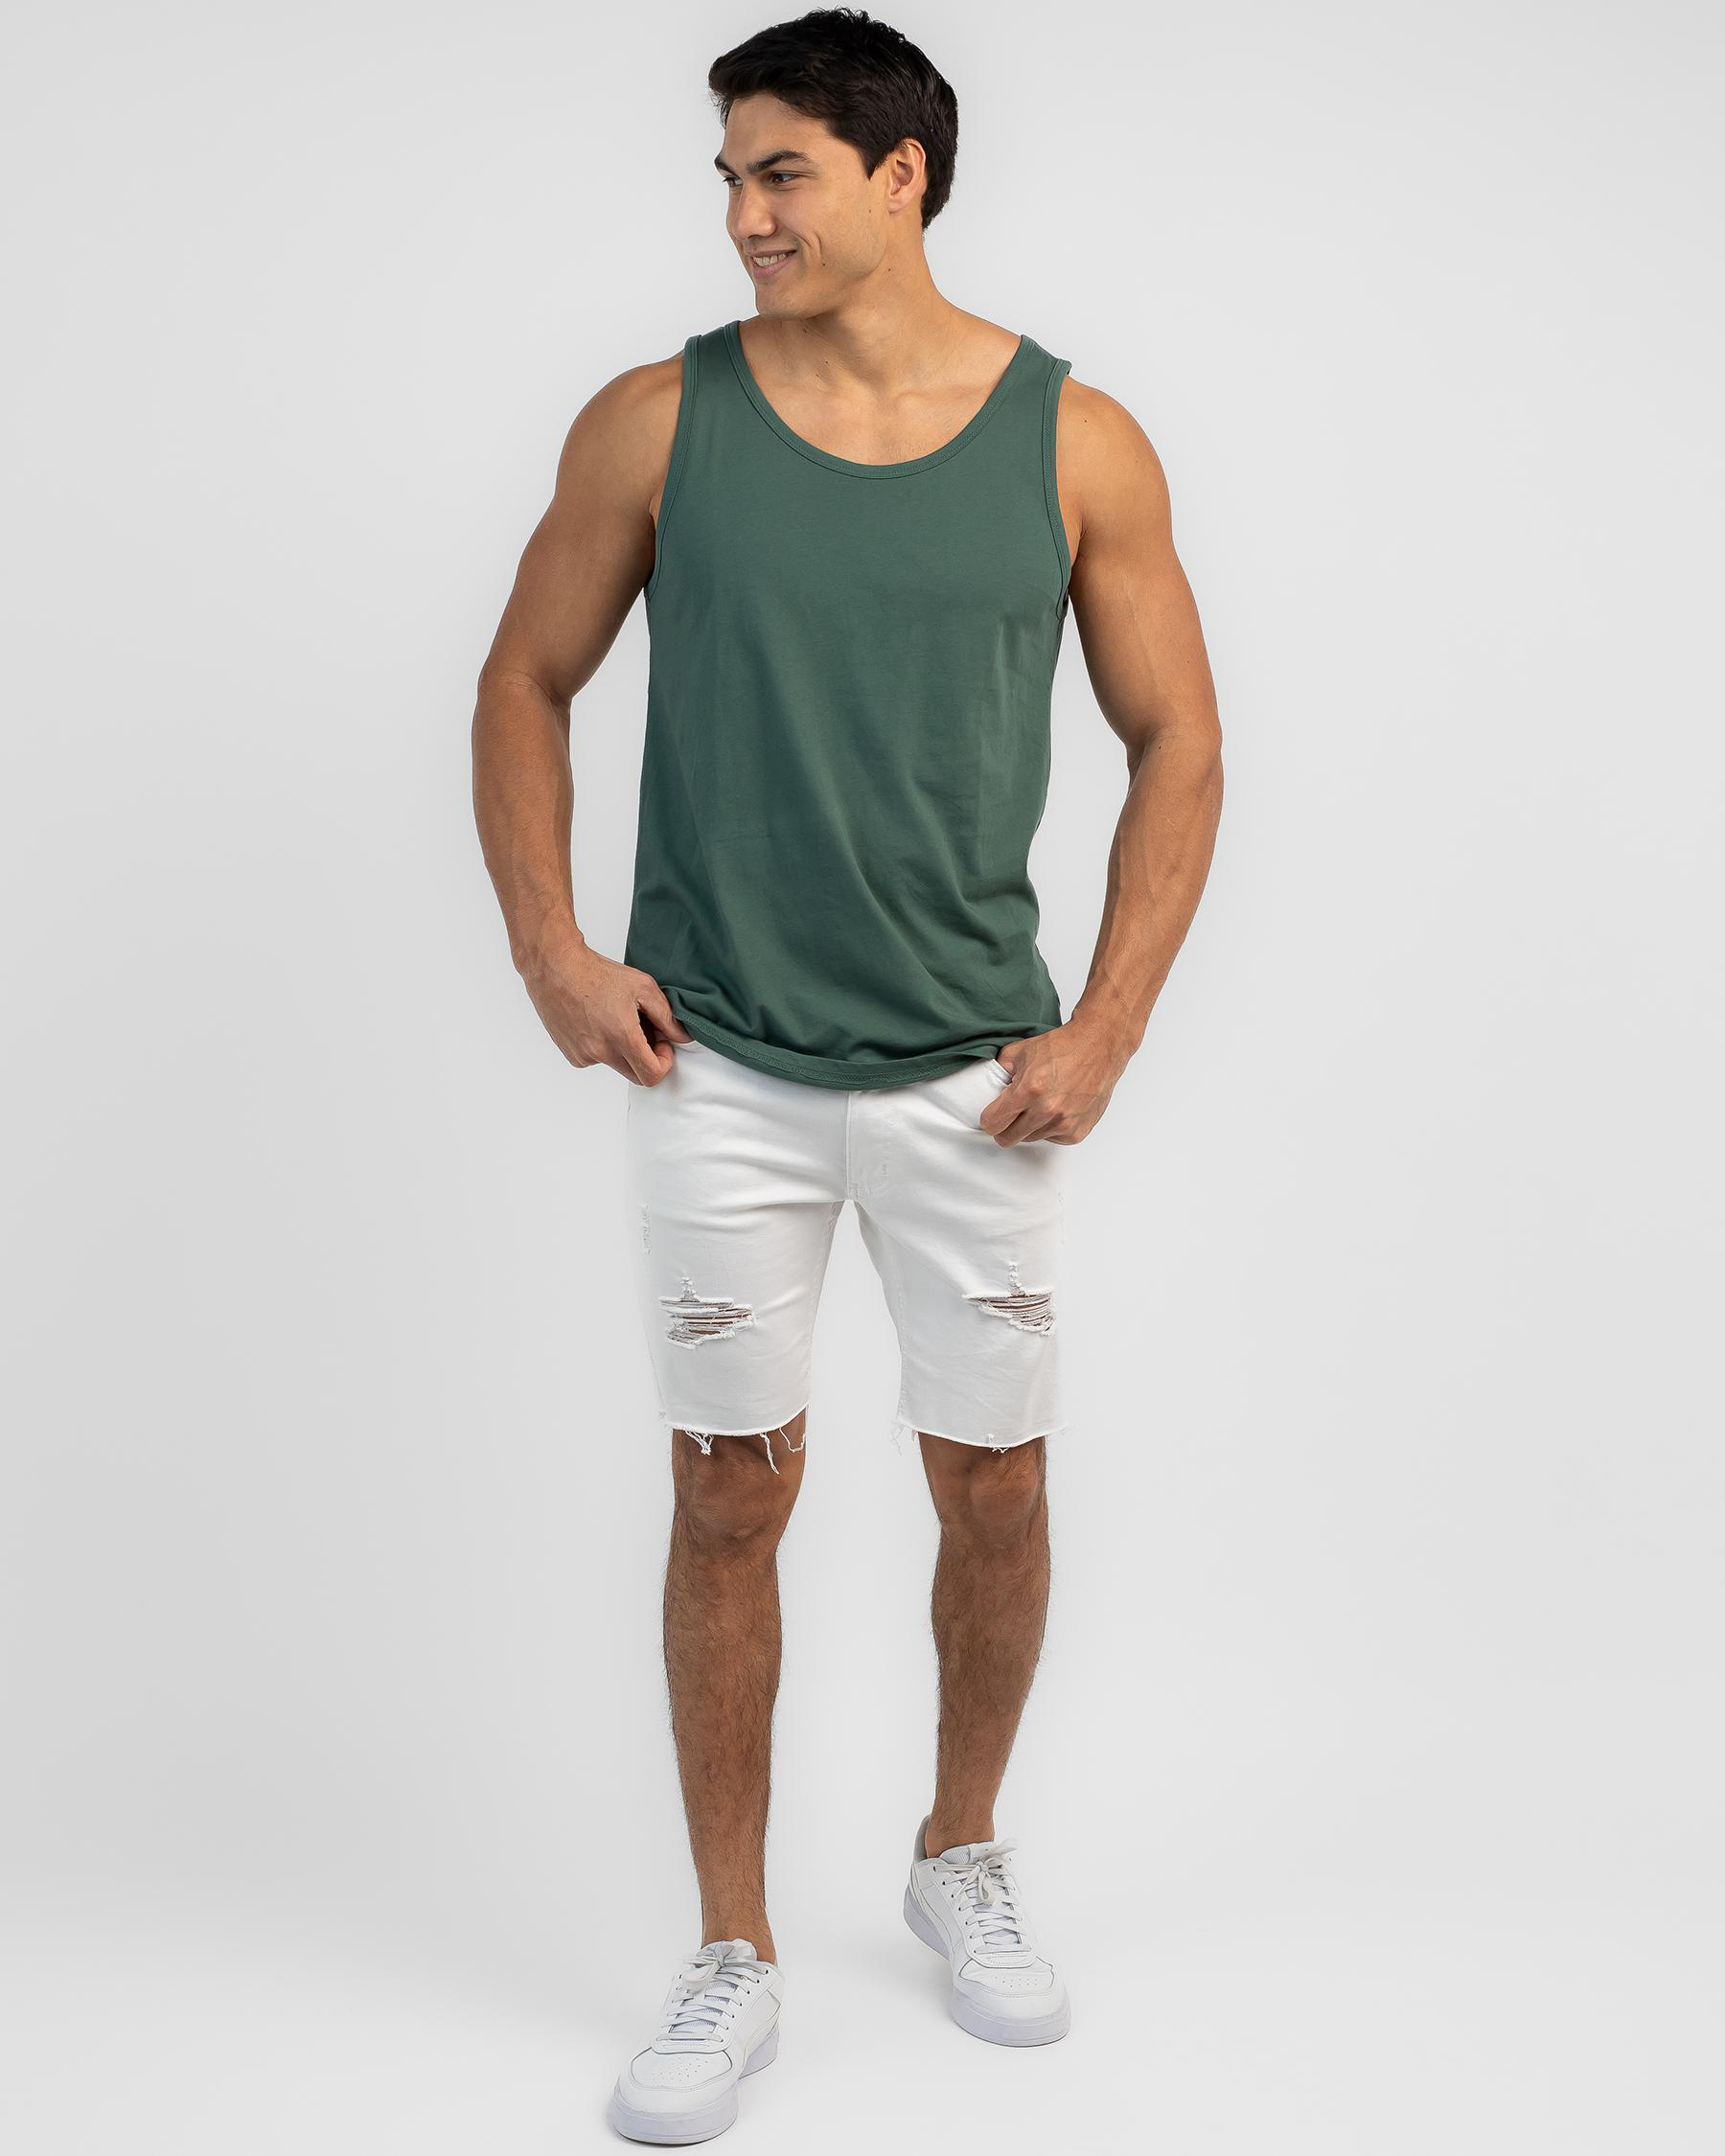 Lucid Essential Singlet In Sea Green - Fast Shipping & Easy Returns ...